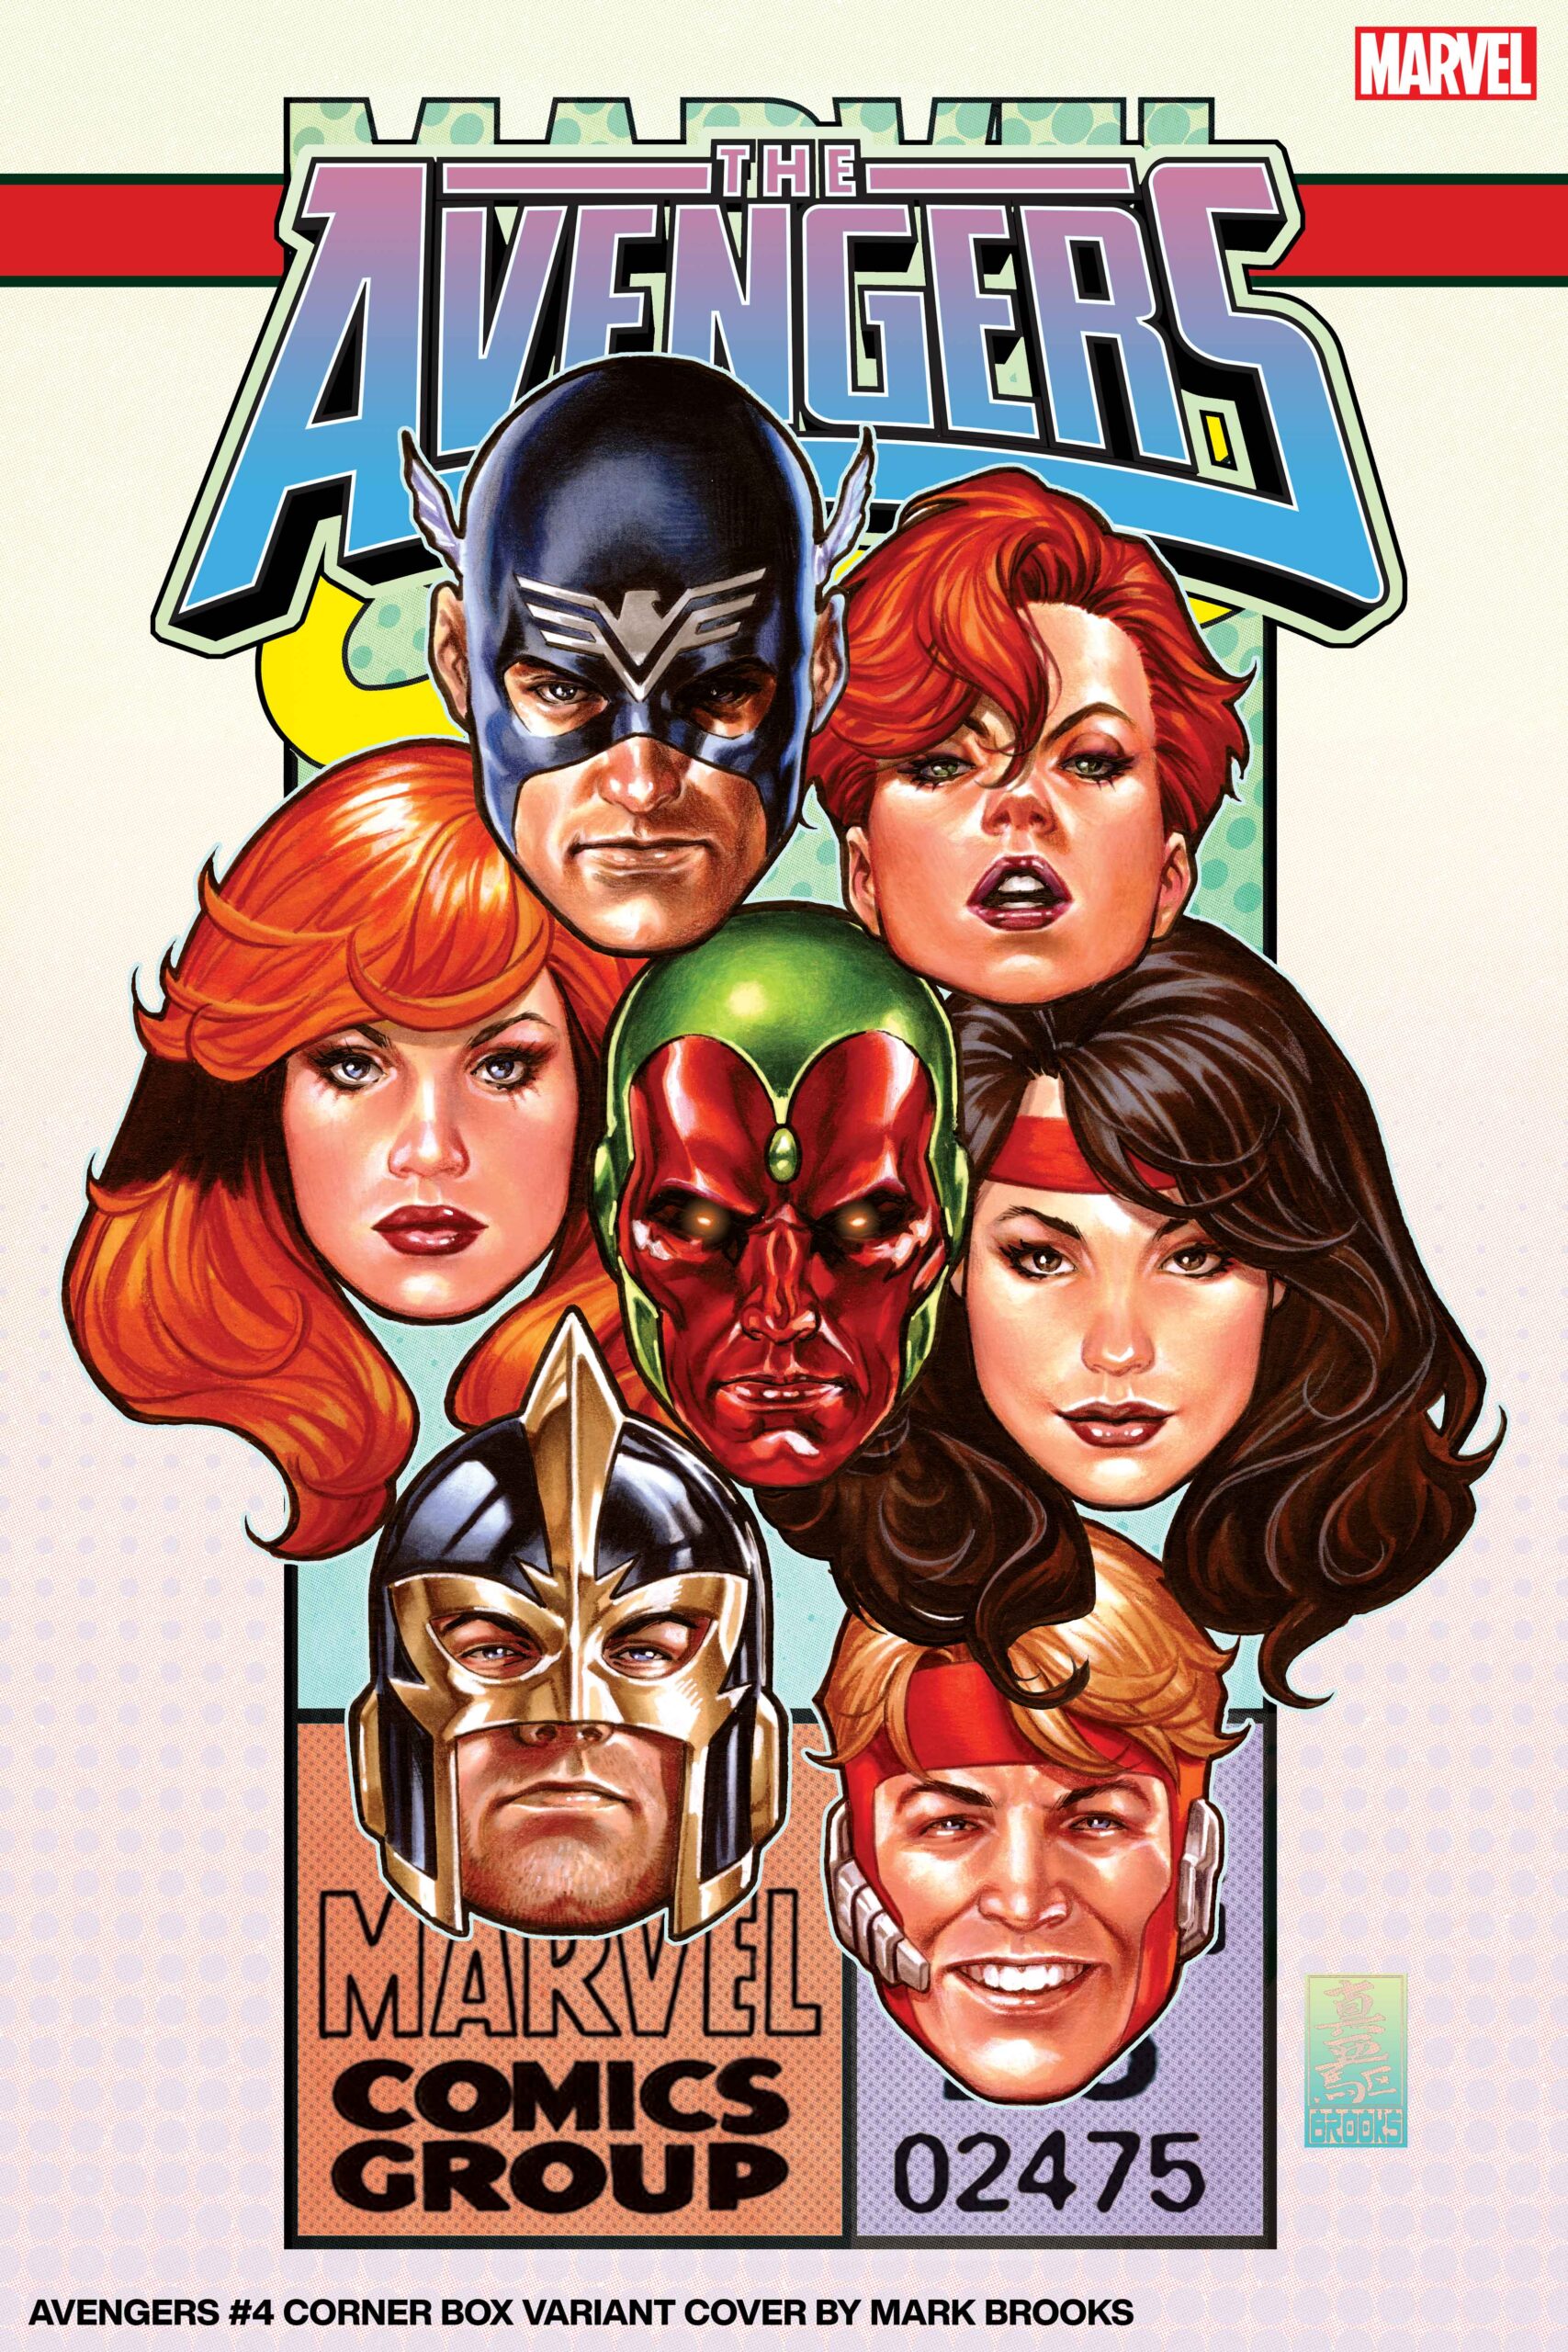 Mark Brooks Unveils Corner Box Variant Covers to Celebrate 60th Anniversaries of Avengers and X-Men